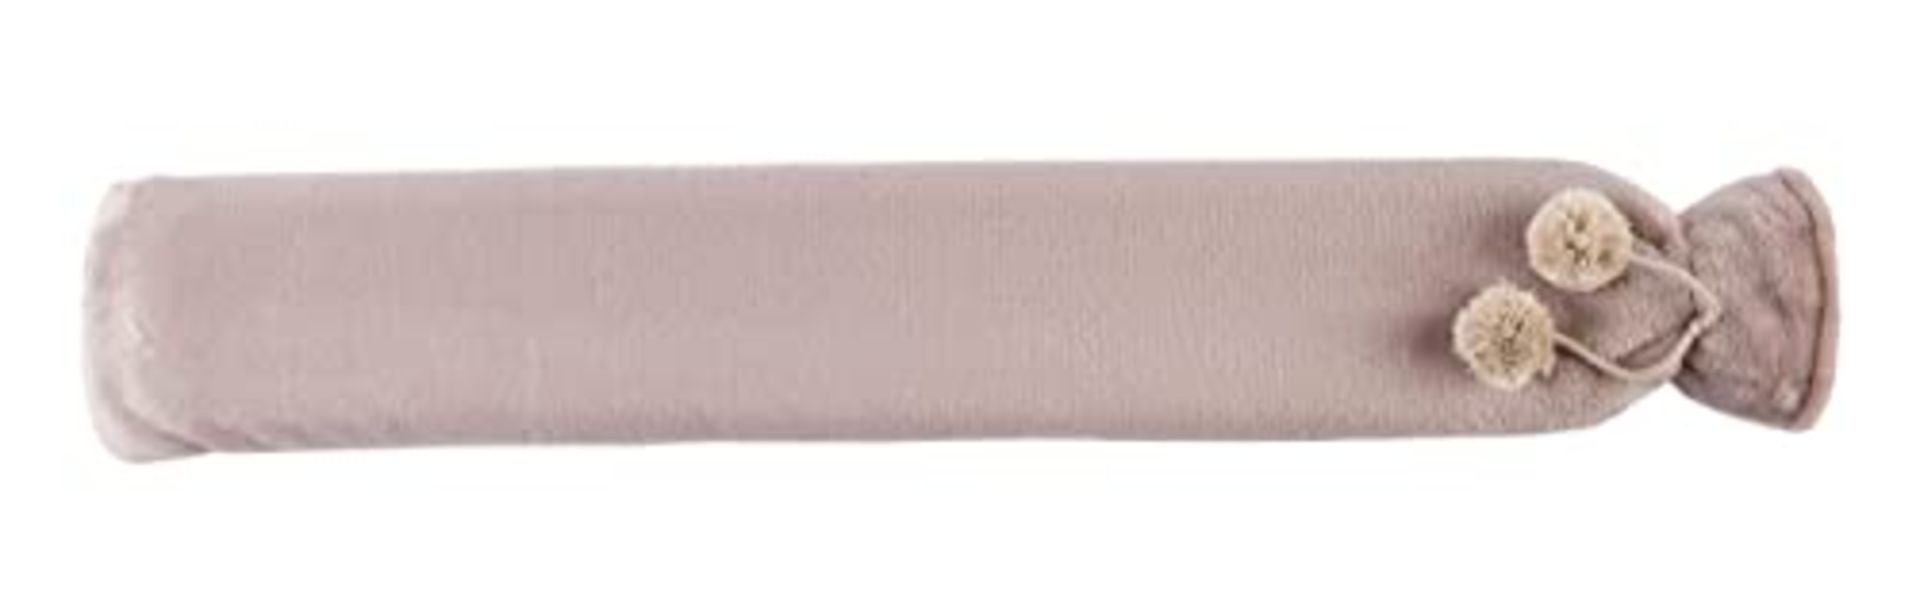 Warmies Extra Long Hot Water Bottle - Clay Fleece, RBOT-FLE-2, Taupe, Medium